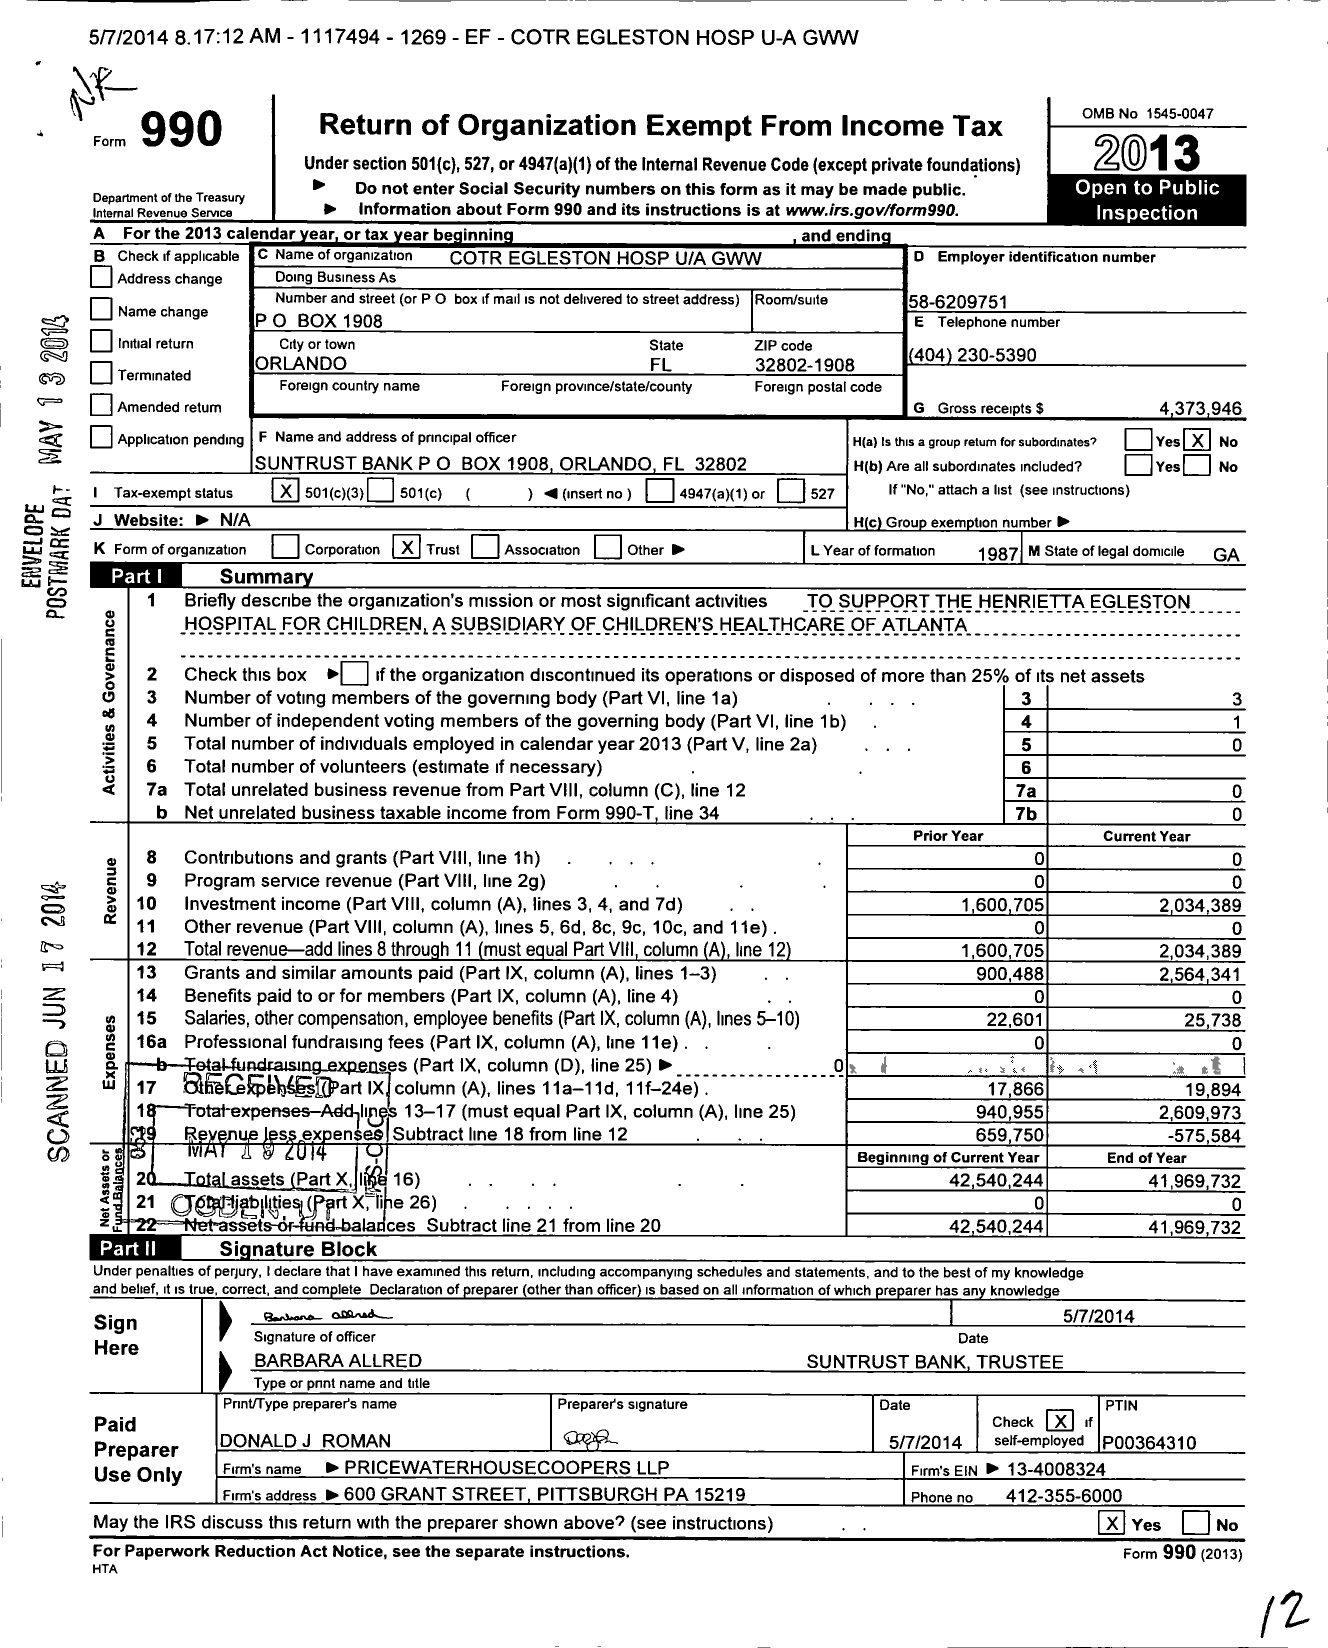 Image of first page of 2013 Form 990 for Cotr Egleston Hospital GWW